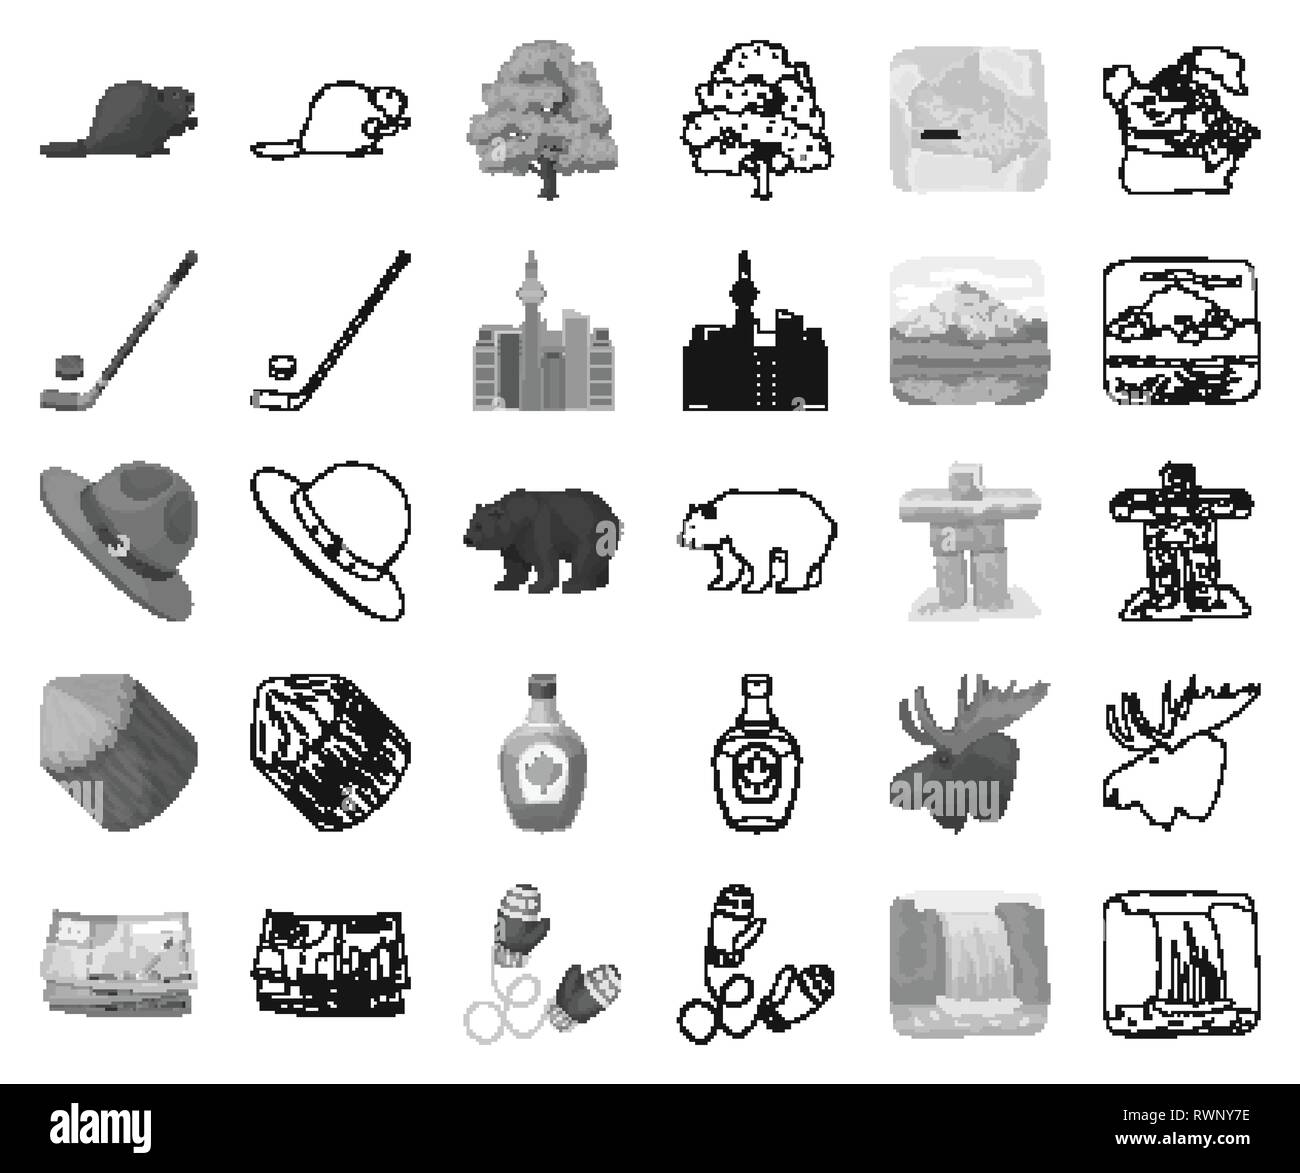 animal,attributes,bear,beaver,bottle,building,canada,city,collection,country,culture,custom,deer,design,dollar,elk,features,fir,glove,handgrip,hat,horns,icon,illustration,isolated,landmark,log,maple,monochrome,outline,mountain,nation,nationality,nature,ocean,puck,ranger,set,sign,sky,snow,stick,stone,symbol,syrup,territory,travel,tree,vector,waterfall,wild Vector Vectors , Stock Vector